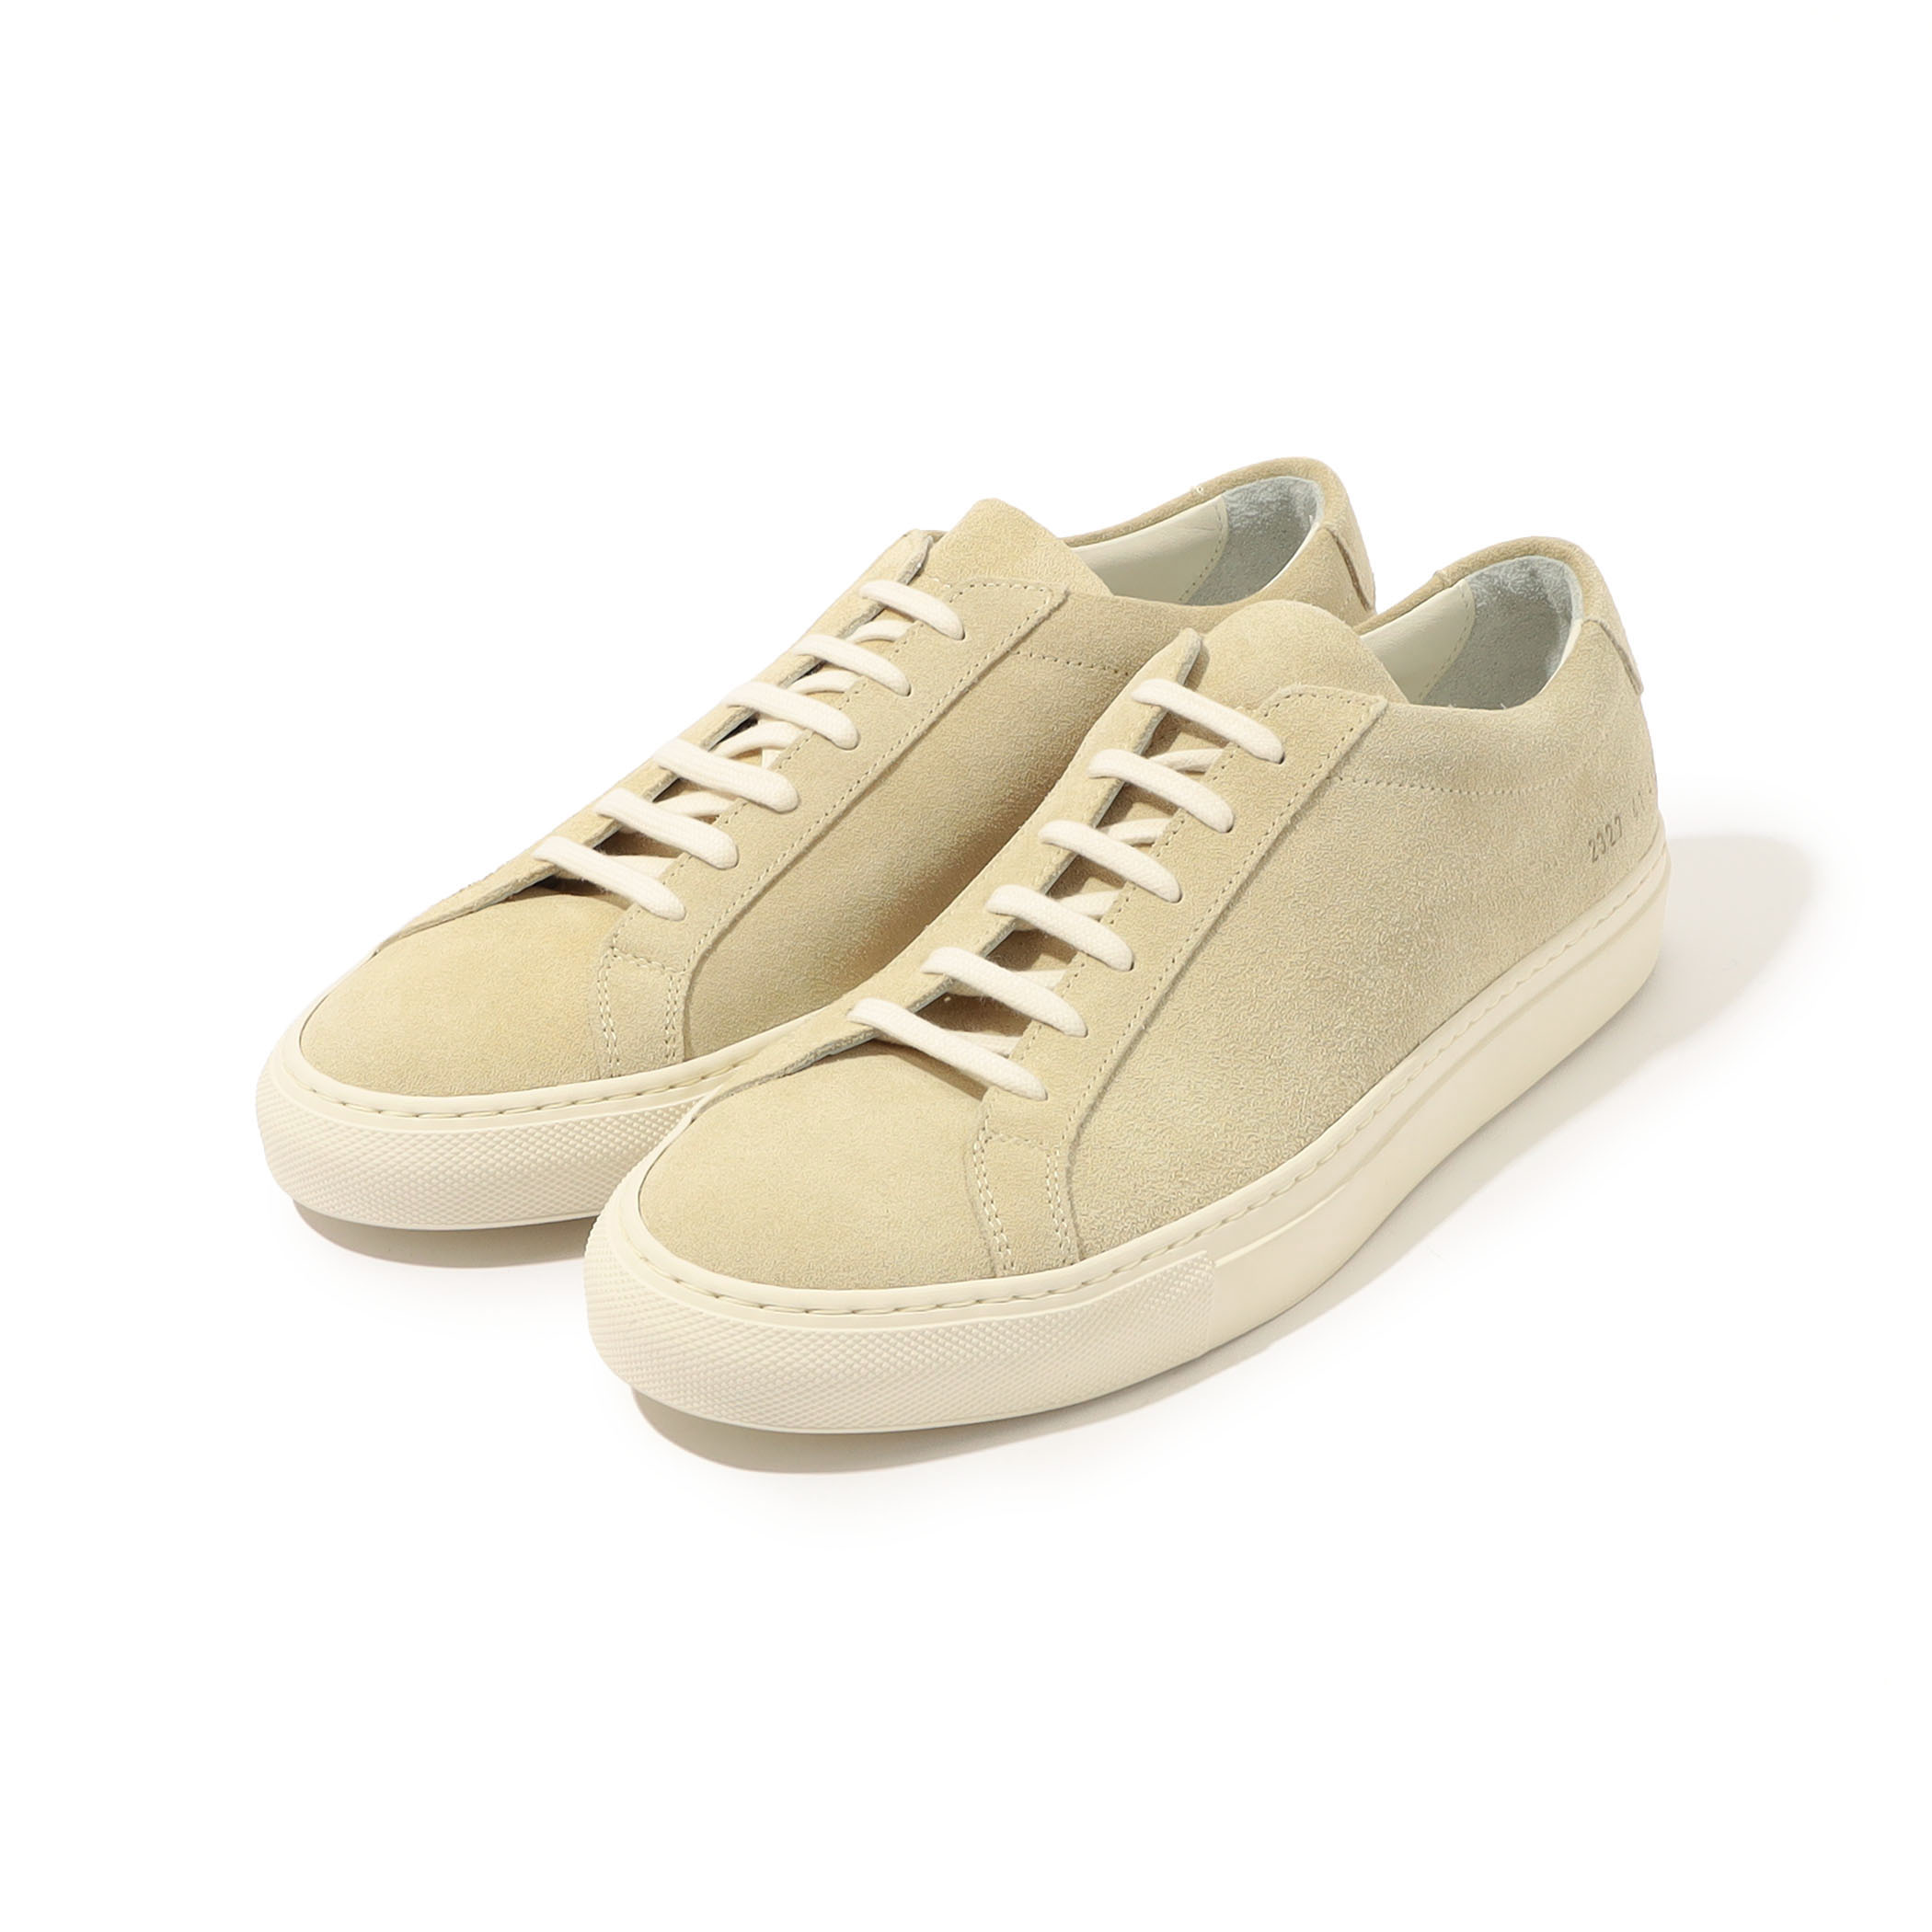 COMMON PROJECTS Achilles Low スエード スニーカー｜トゥモローランド 公式通販